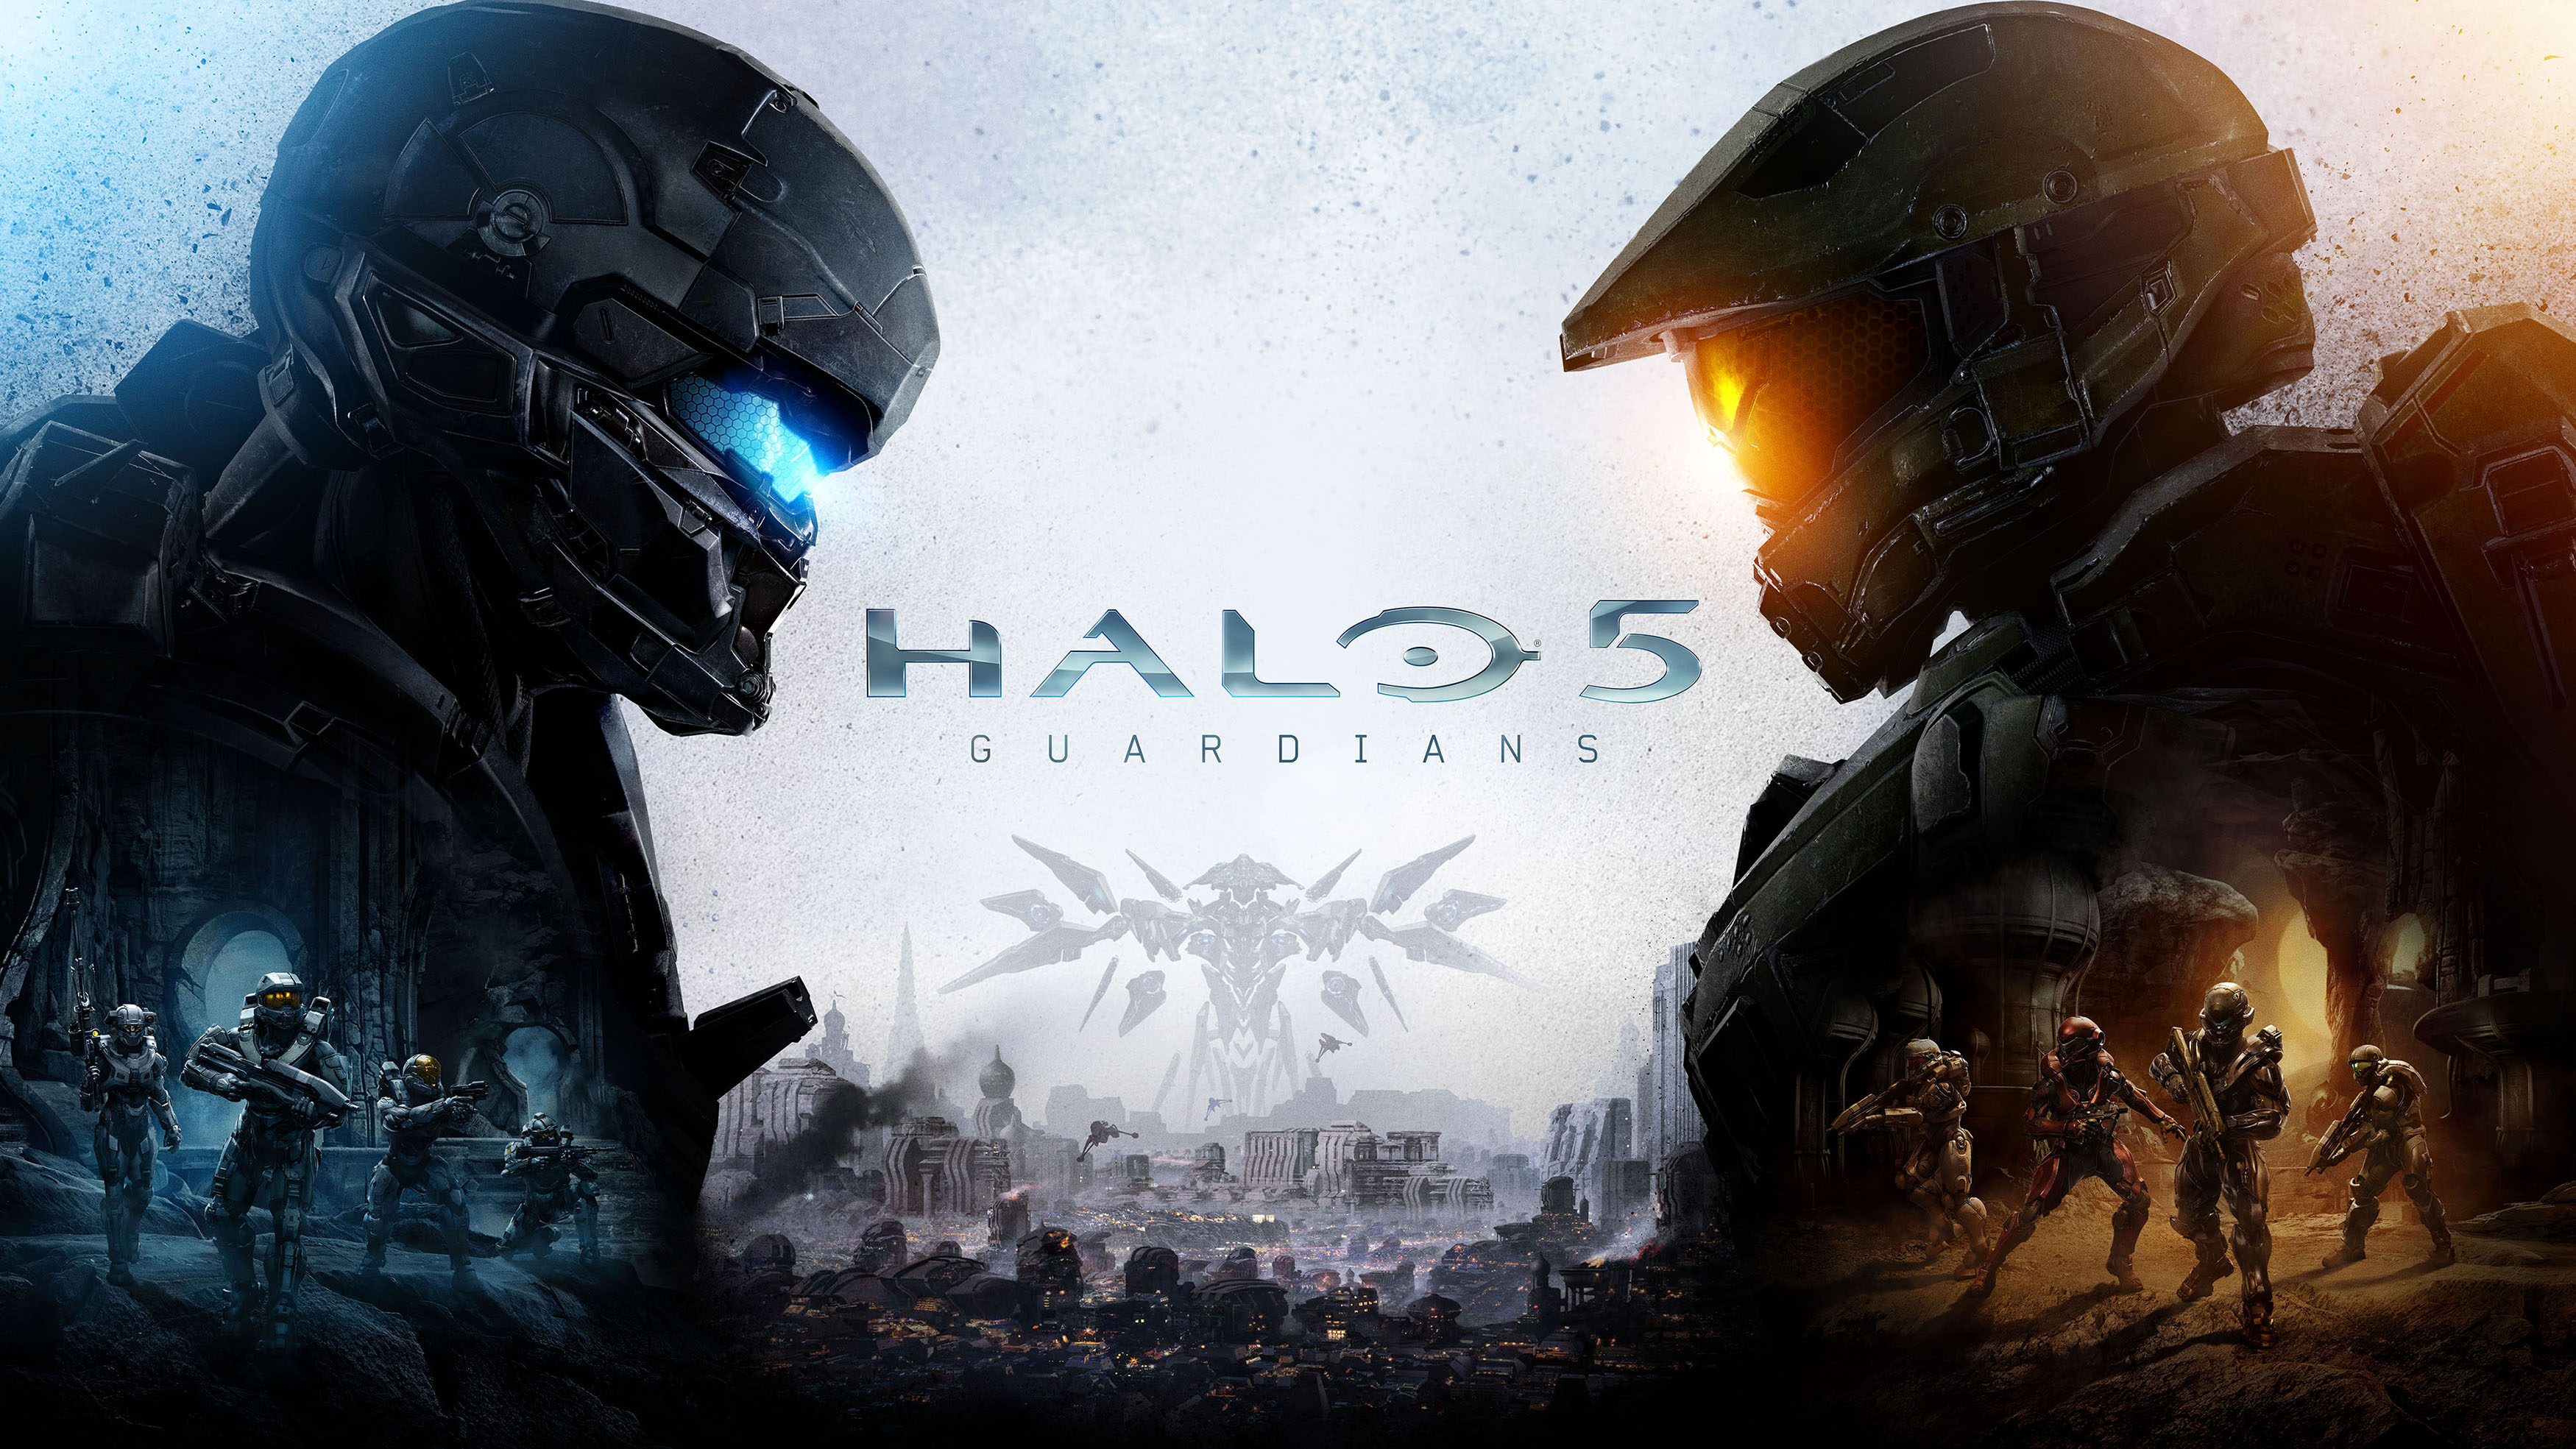 Halo Guardians Cover Art Revealed